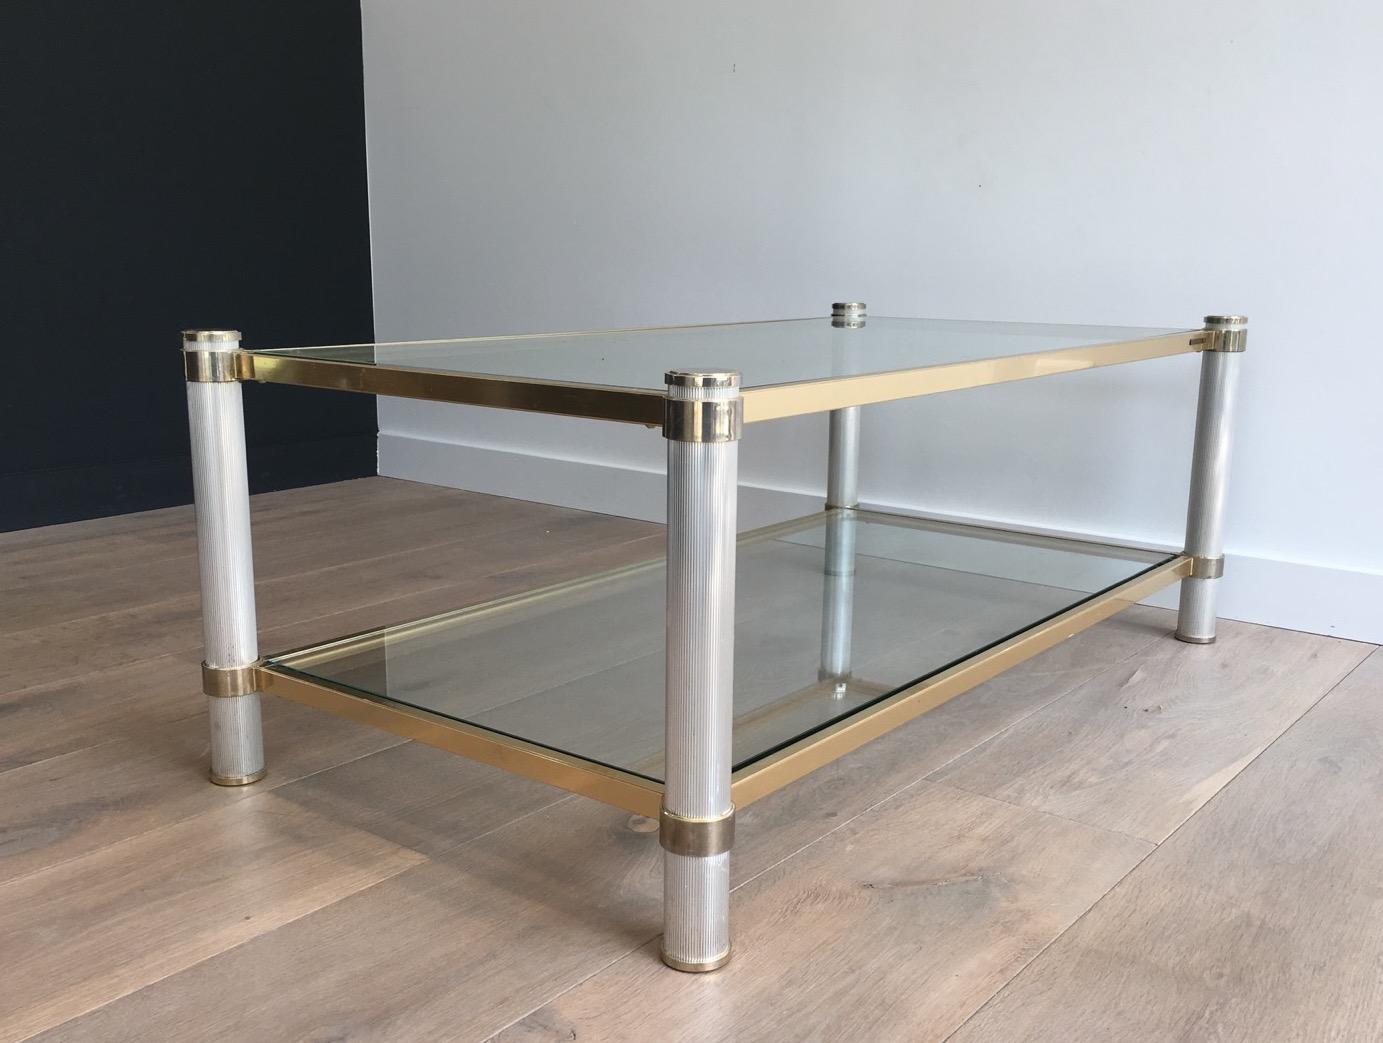  Gold Gilt and Silver Color Aluminium Coffee table with Fluted Legs by P. Vandel For Sale 10